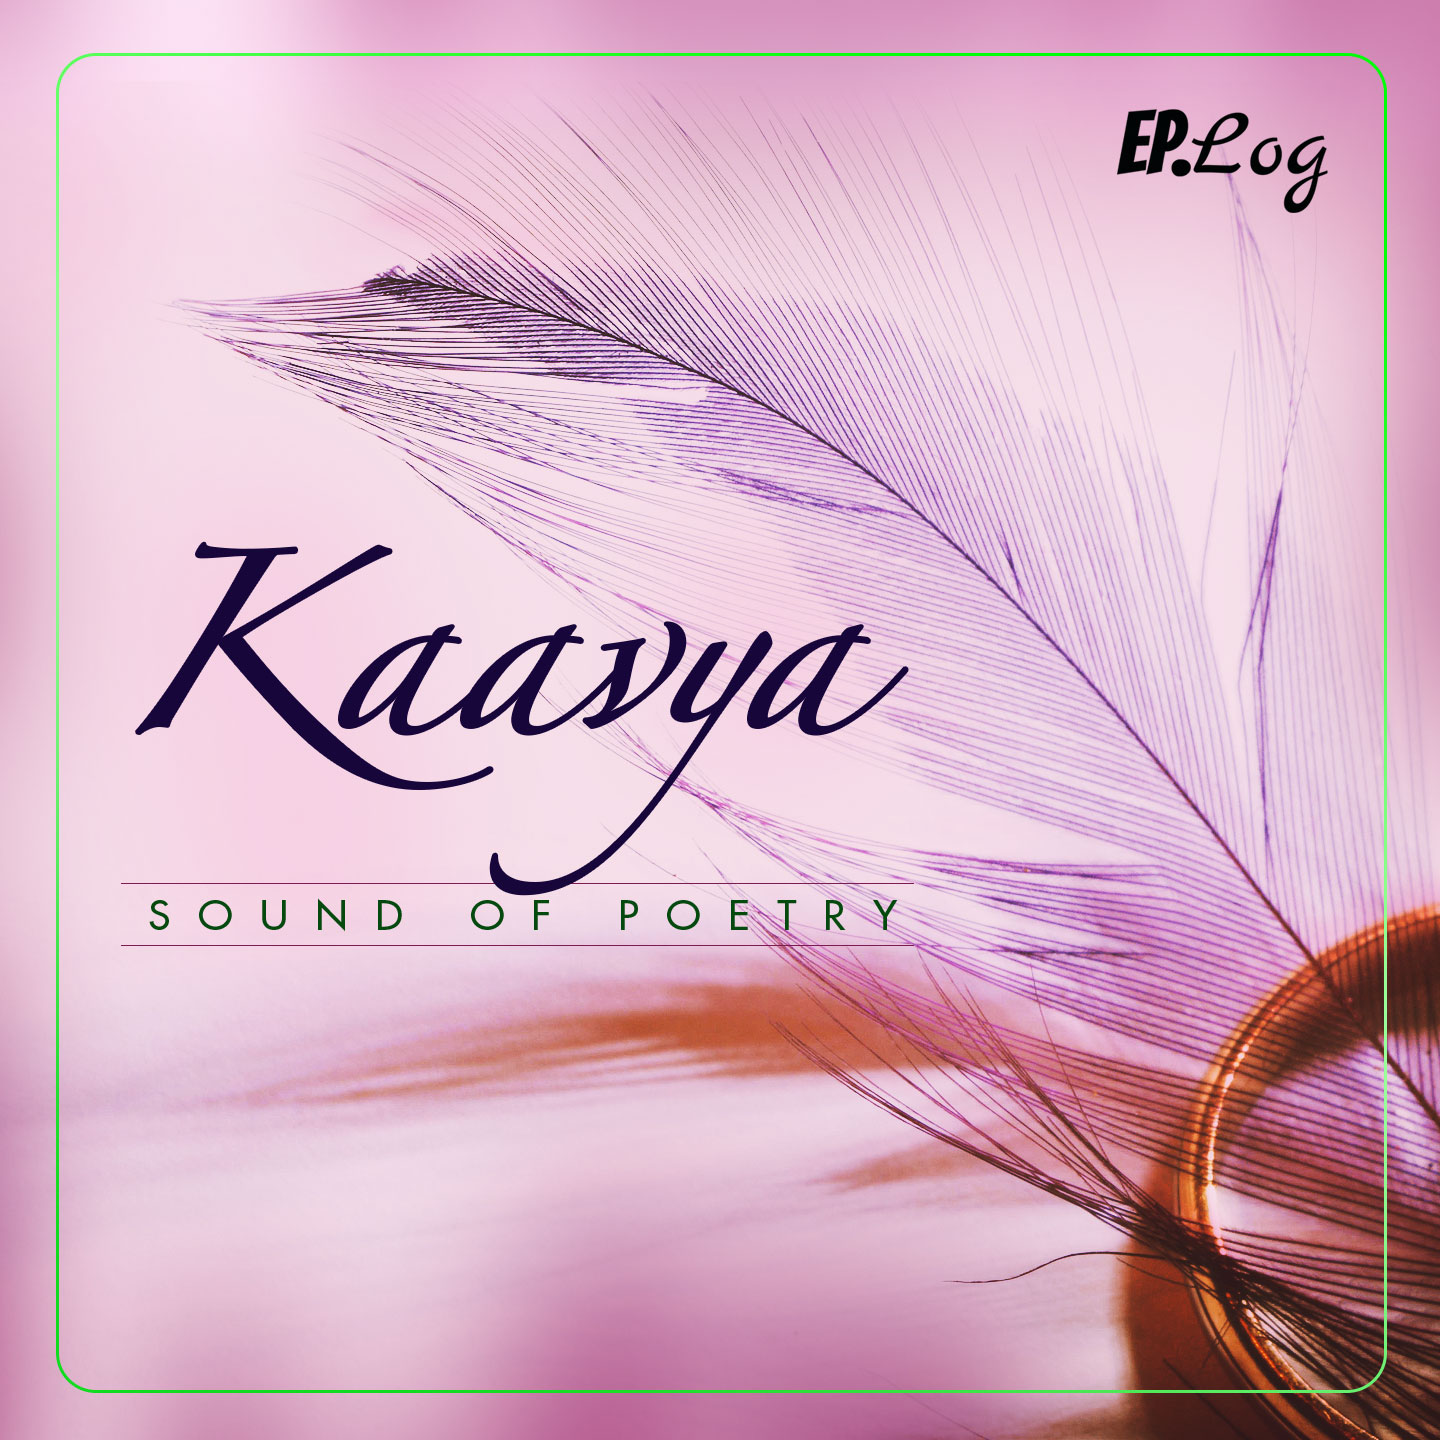 Introduction: Kaavya - The Sound Of Poetry